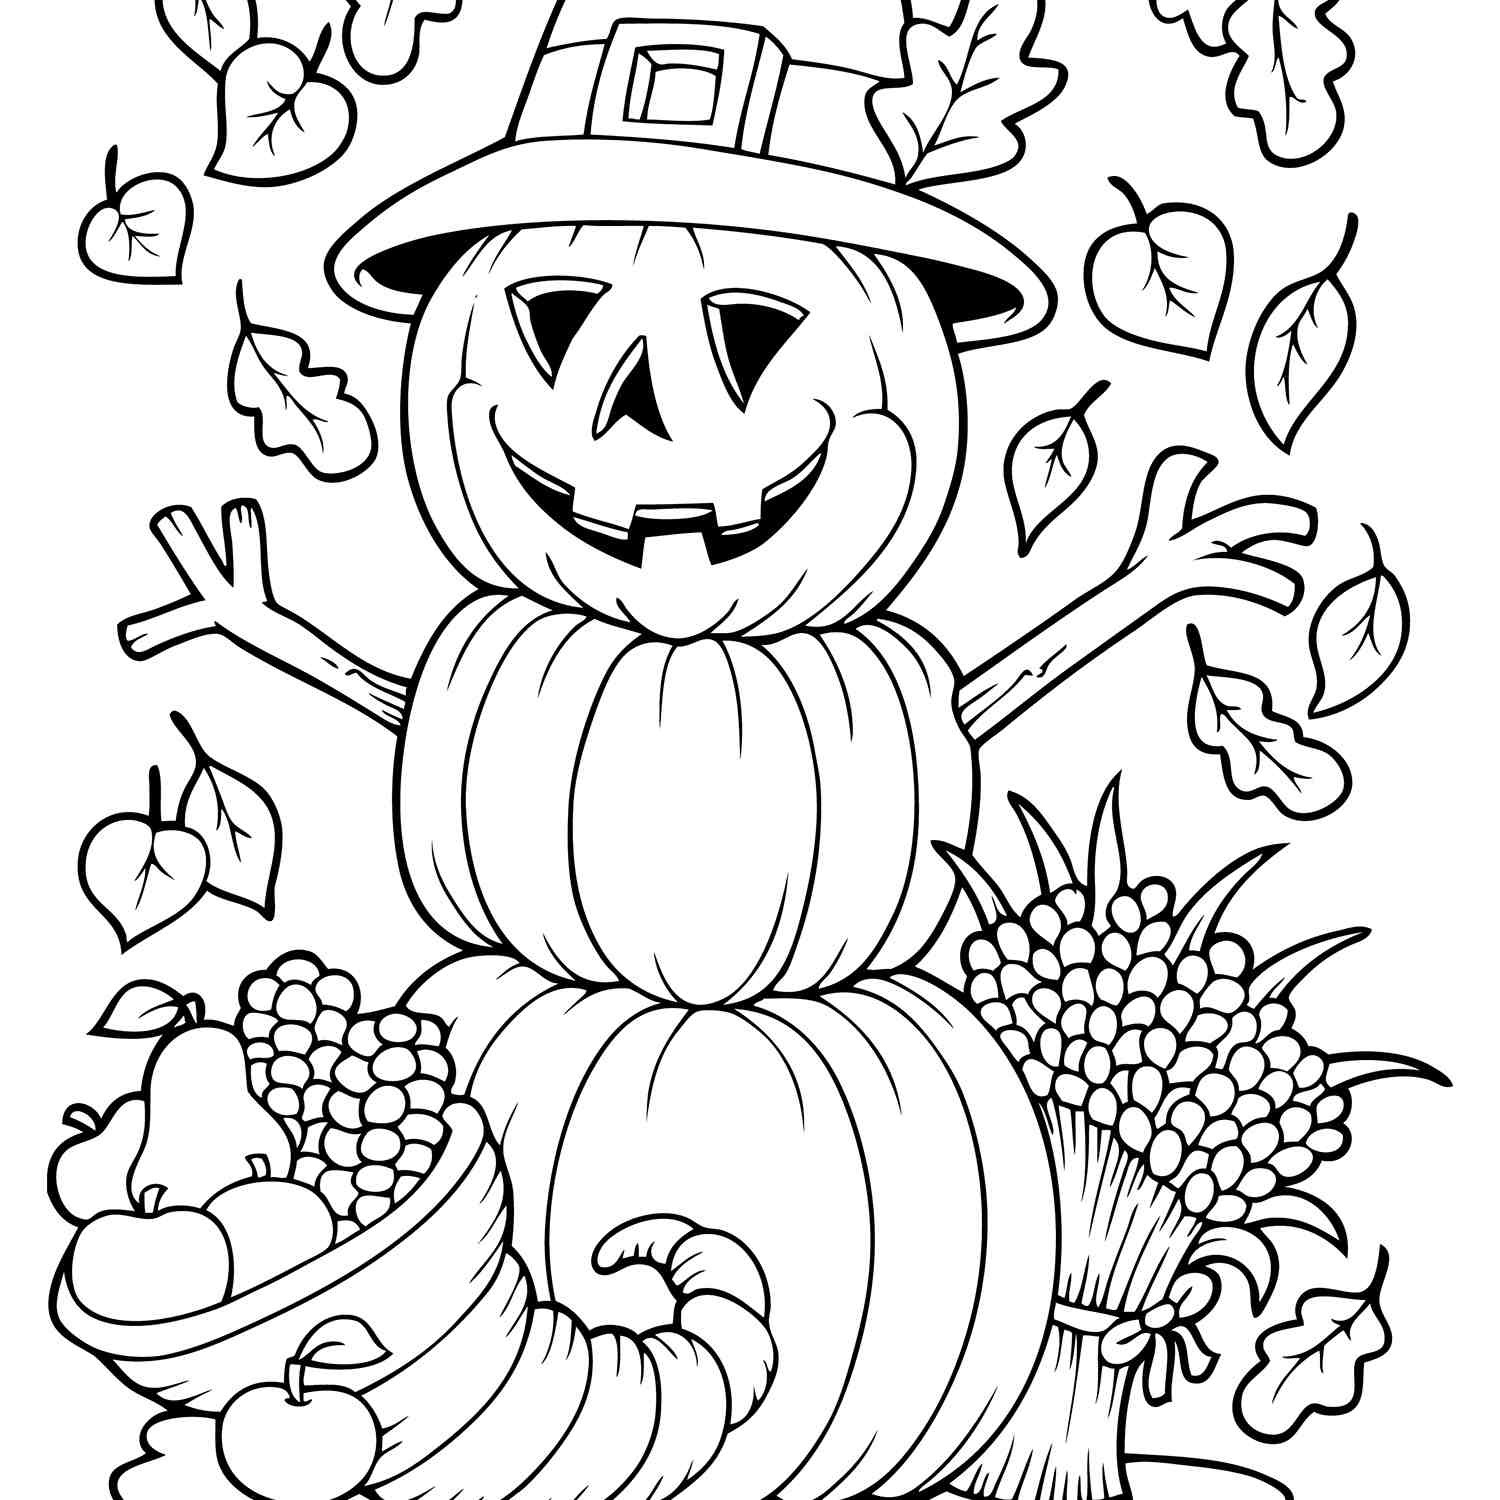 Coloring Pages For Kids Fall
 Free Autumn and Fall Coloring Pages